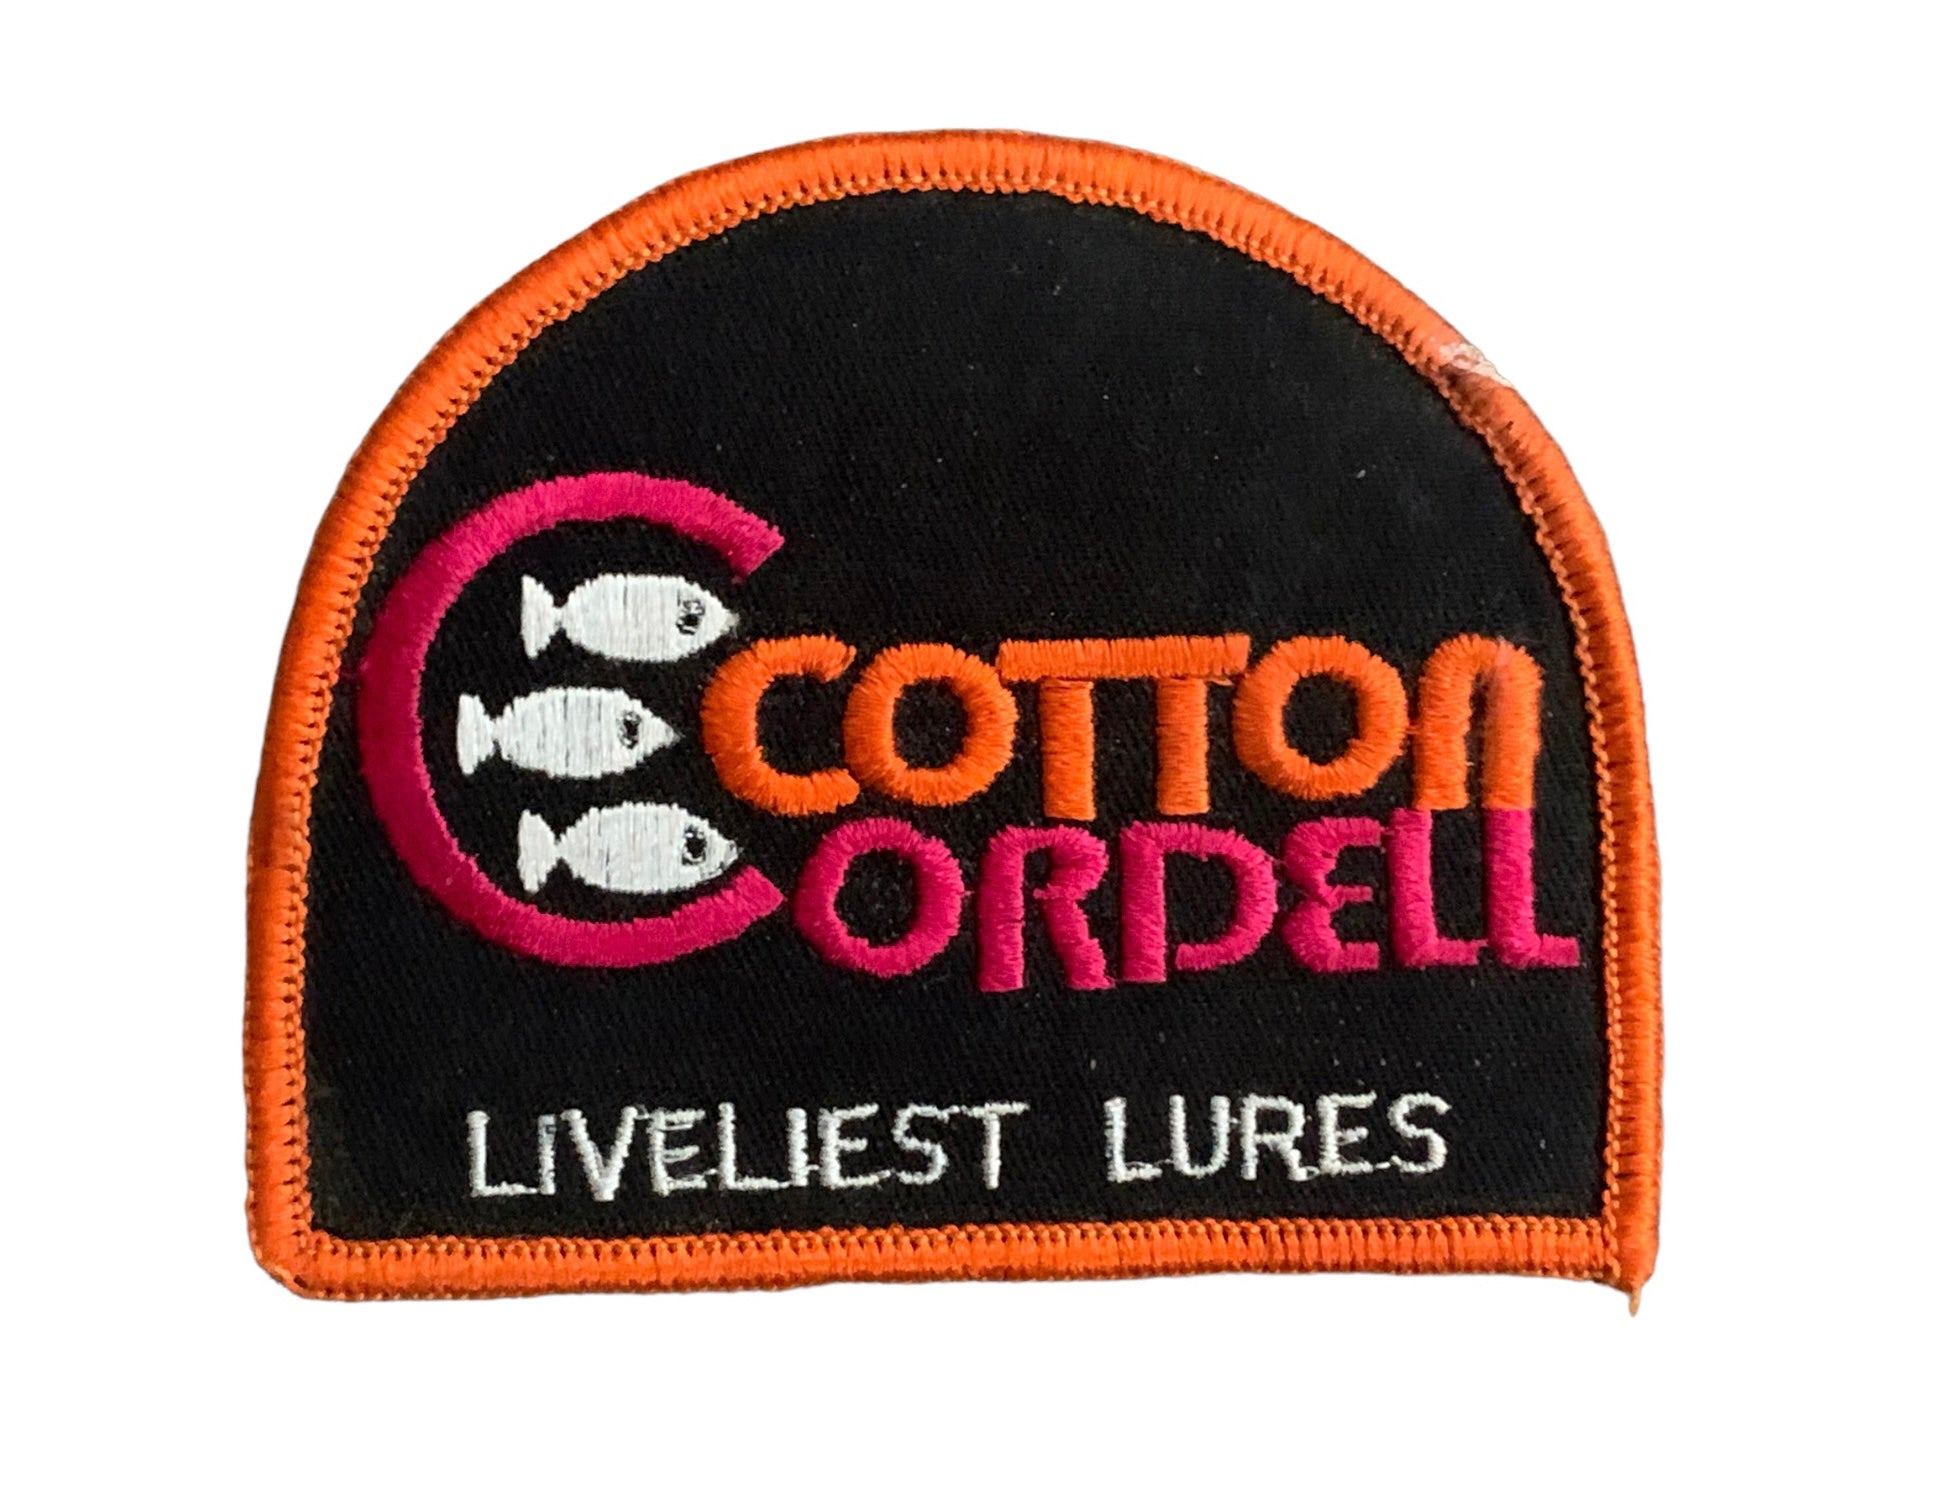 COTTON CORDELL LIVELIEST LURES Vintage Patch – Toad Tackle